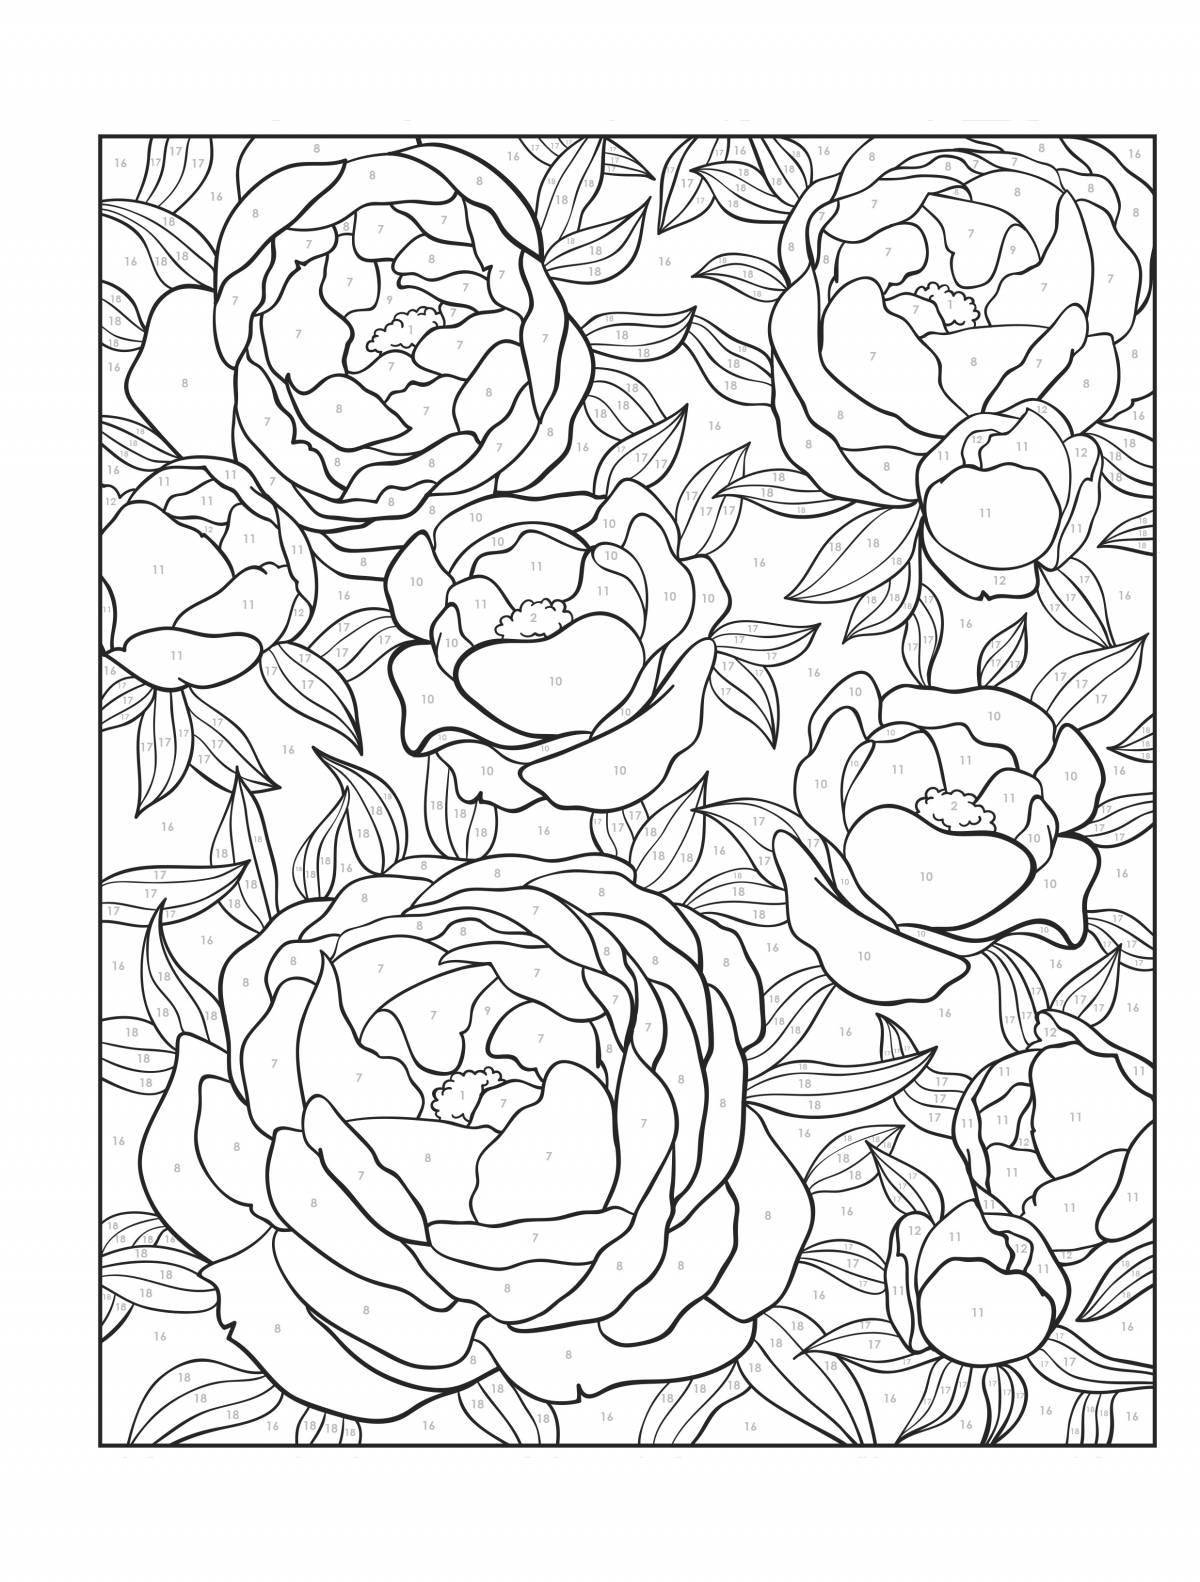 Great rose coloring by numbers